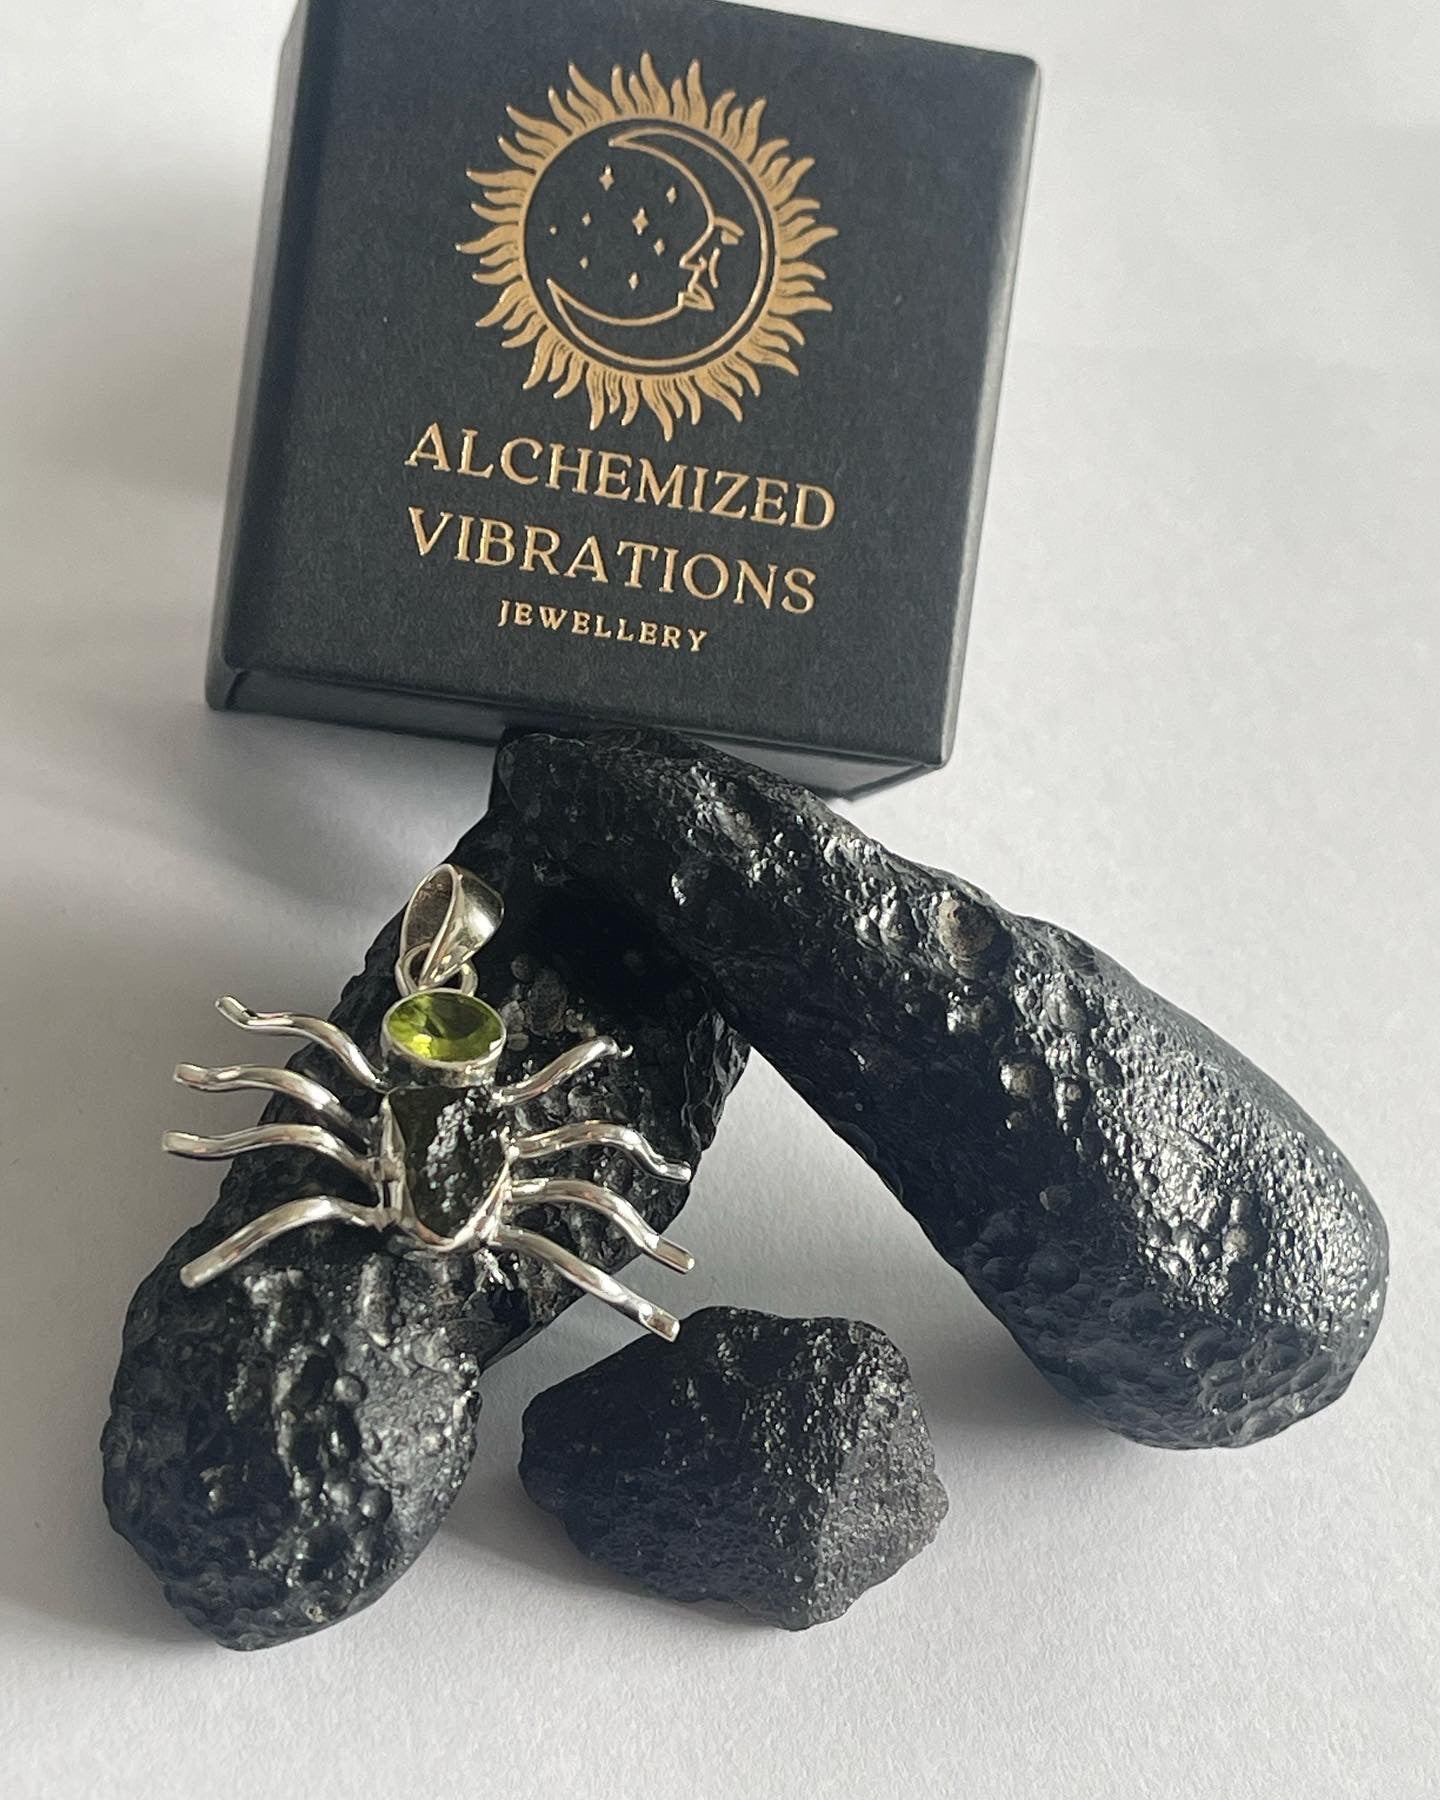 Moldavite and Peridot spider pendant, set in pure sterling silver